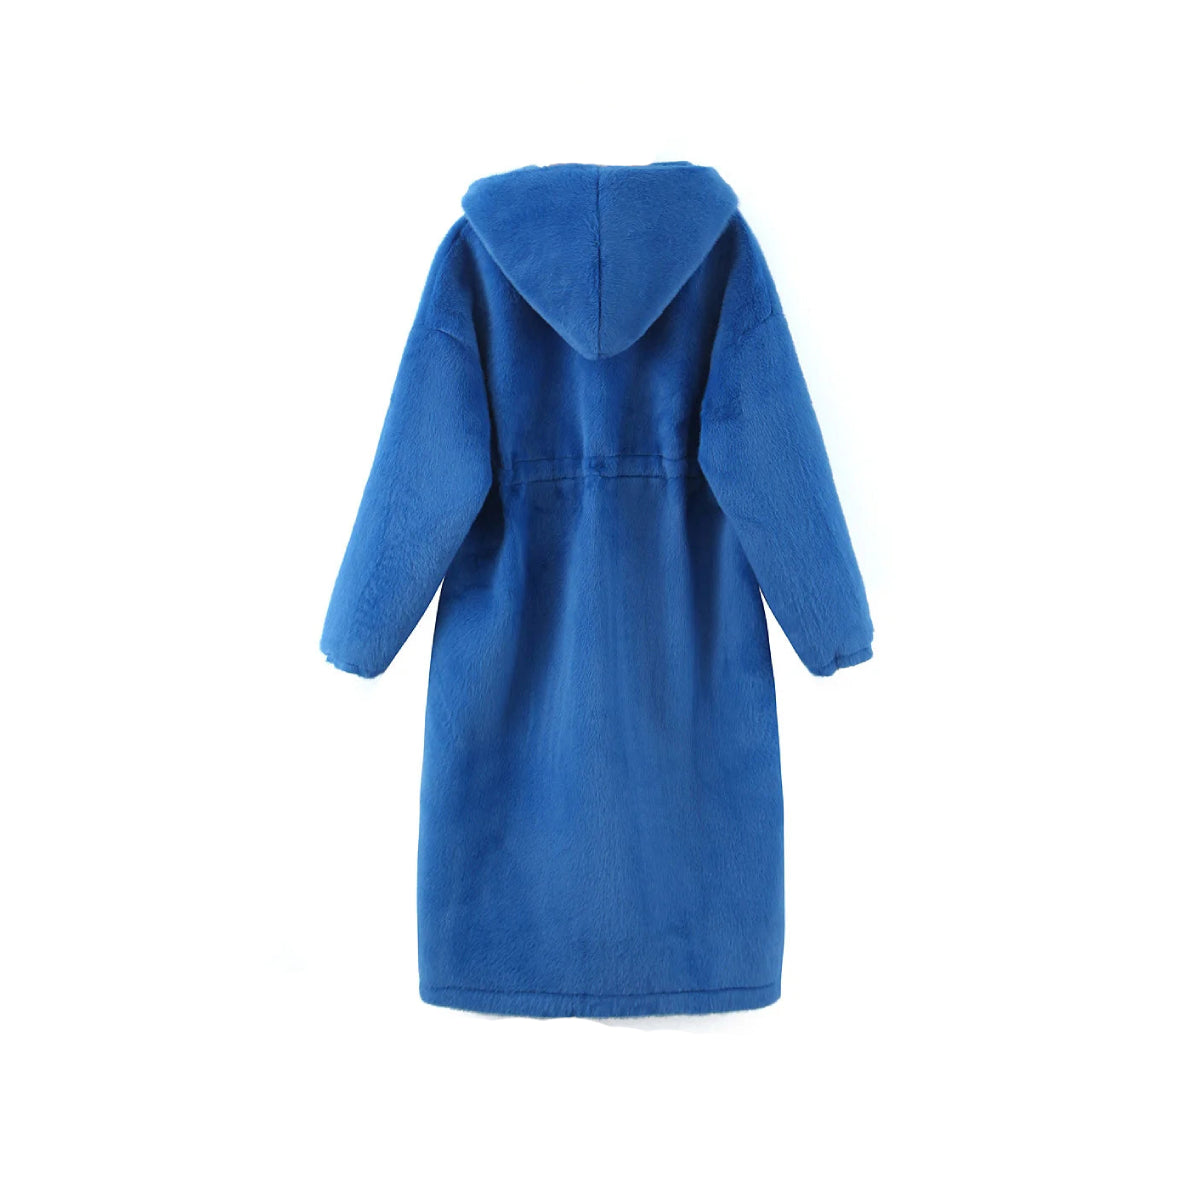 Solid Color Warm Thick Fluffy Faux Fur Long Oversized Coat